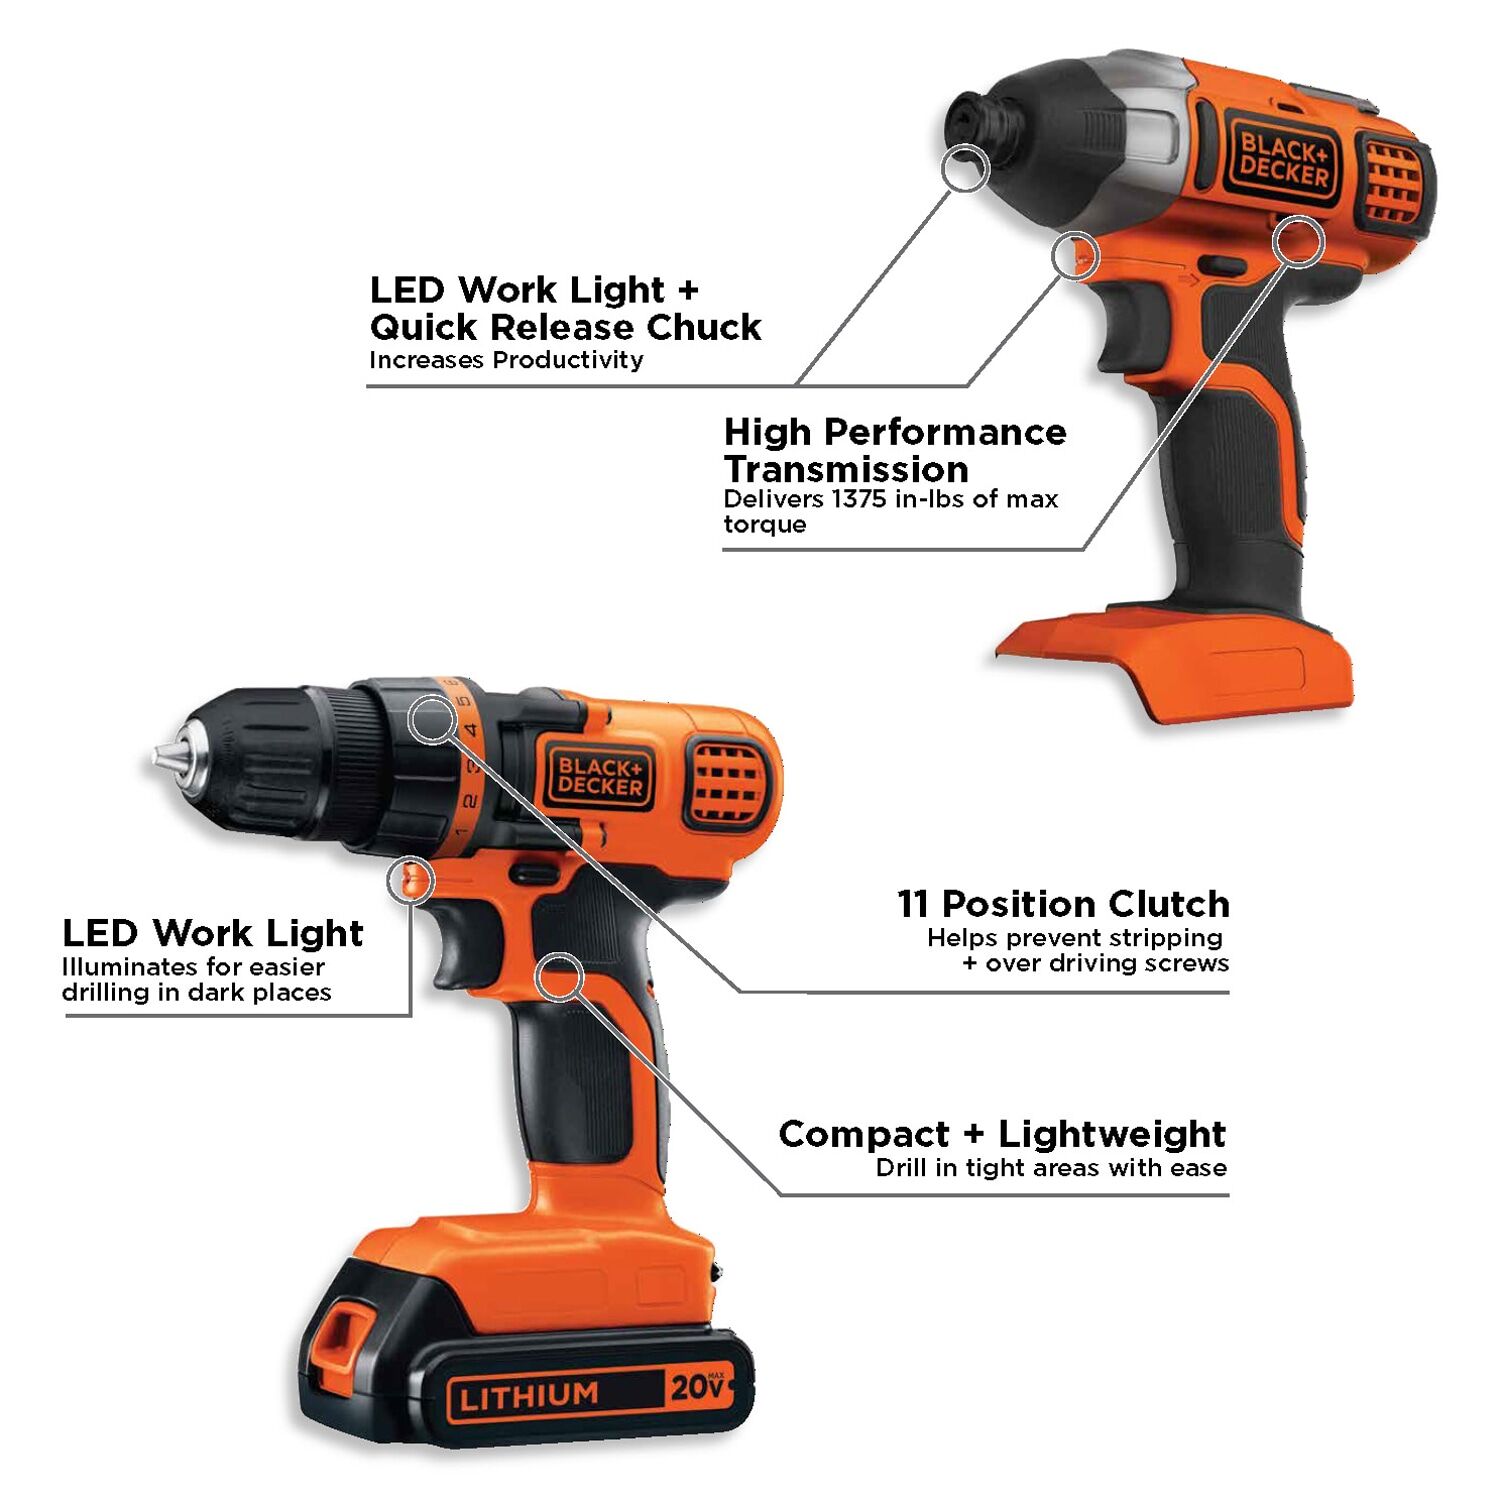 Product walkaround of the Black and decker 20 volt max lithium ion drill/driver plus impact combo kit